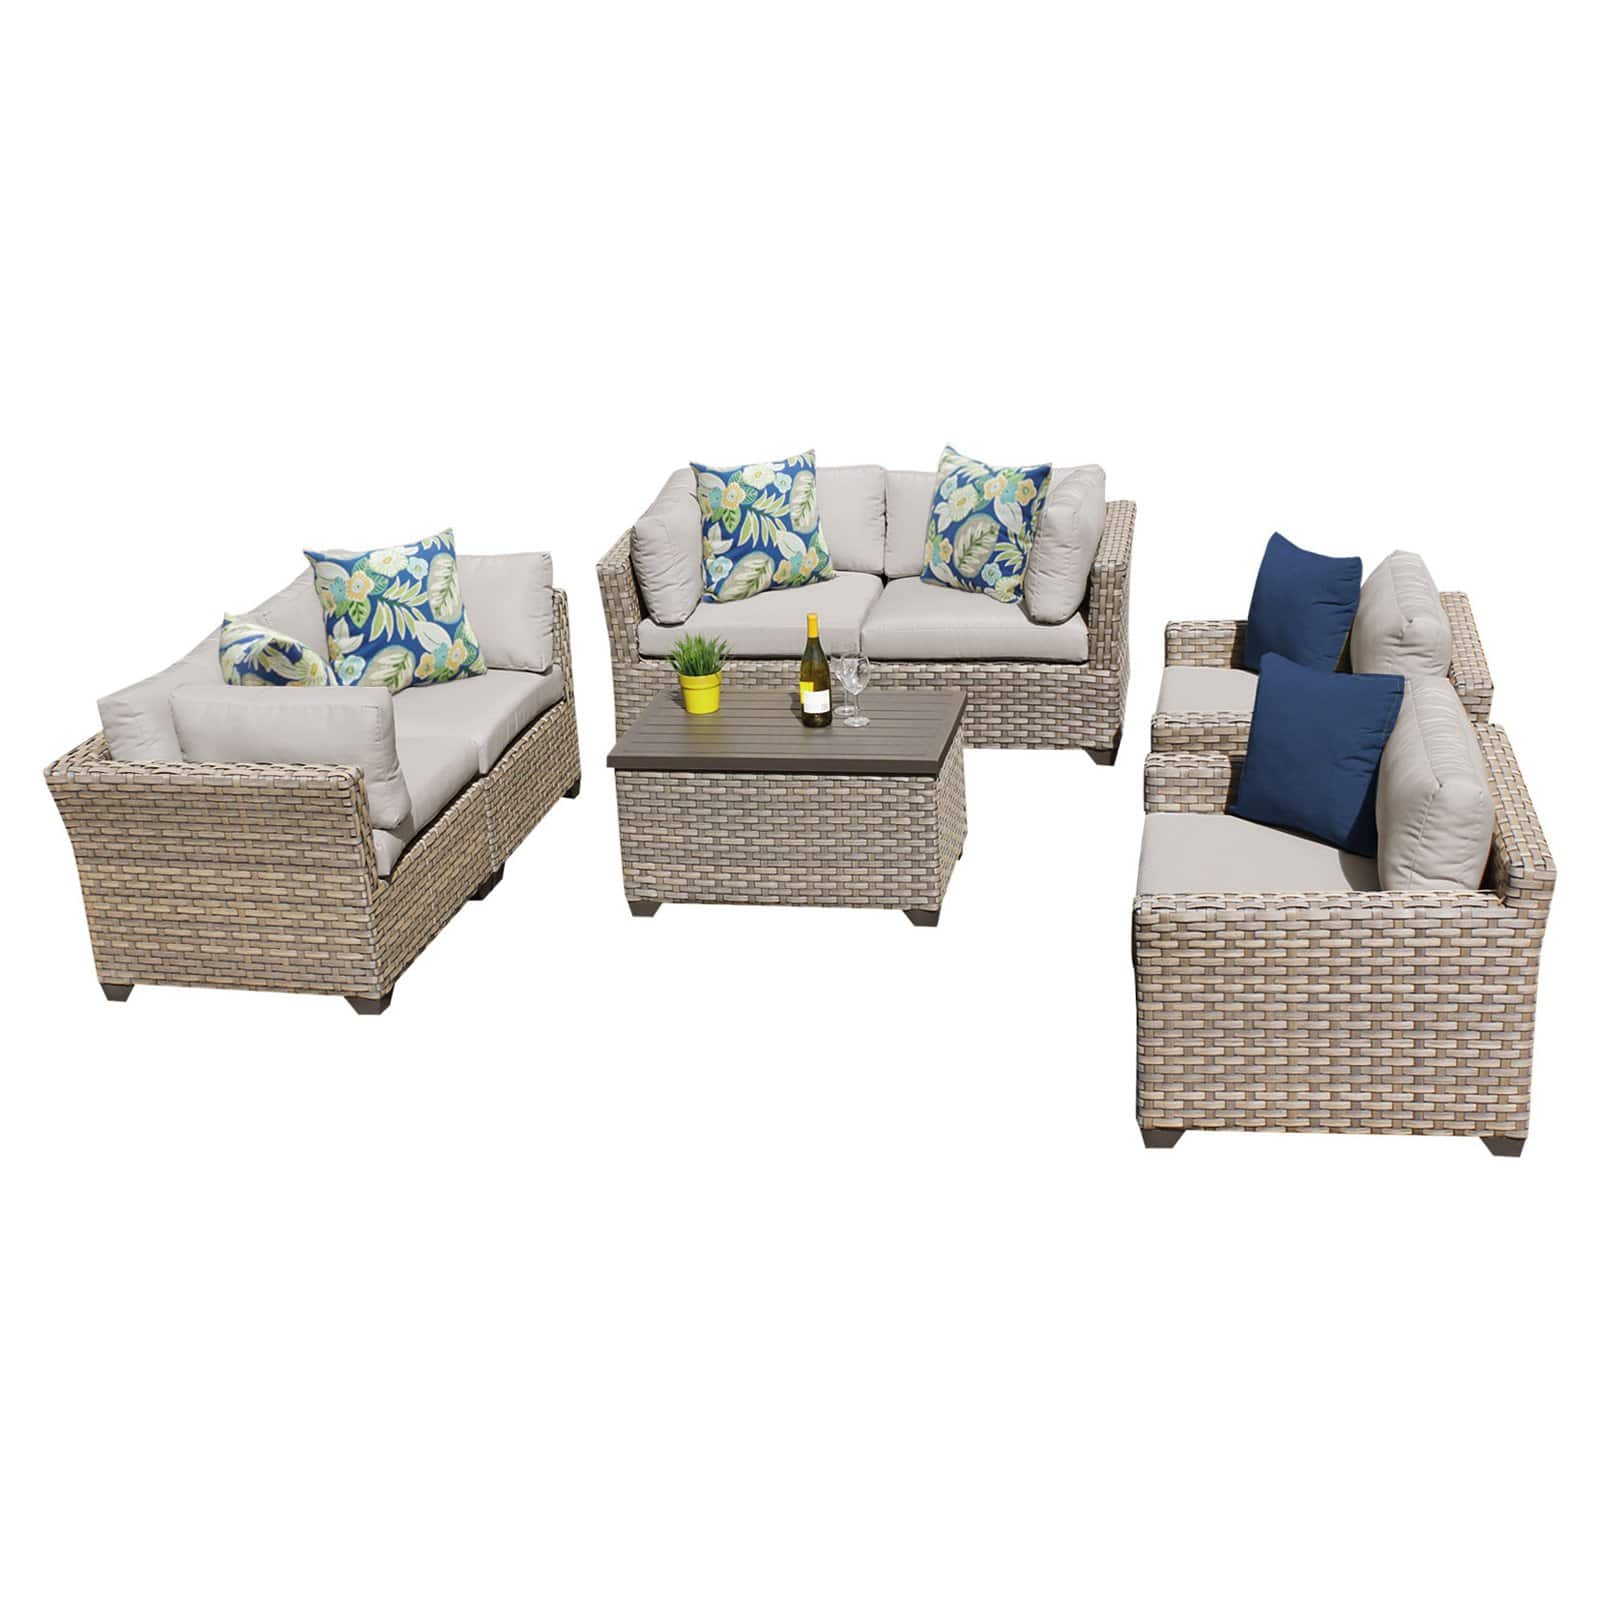 TK Classics Monterey Wicker 7 Piece Patio Conversation Set with Club Chair and 2 Sets of Cushion Covers - image 2 of 5